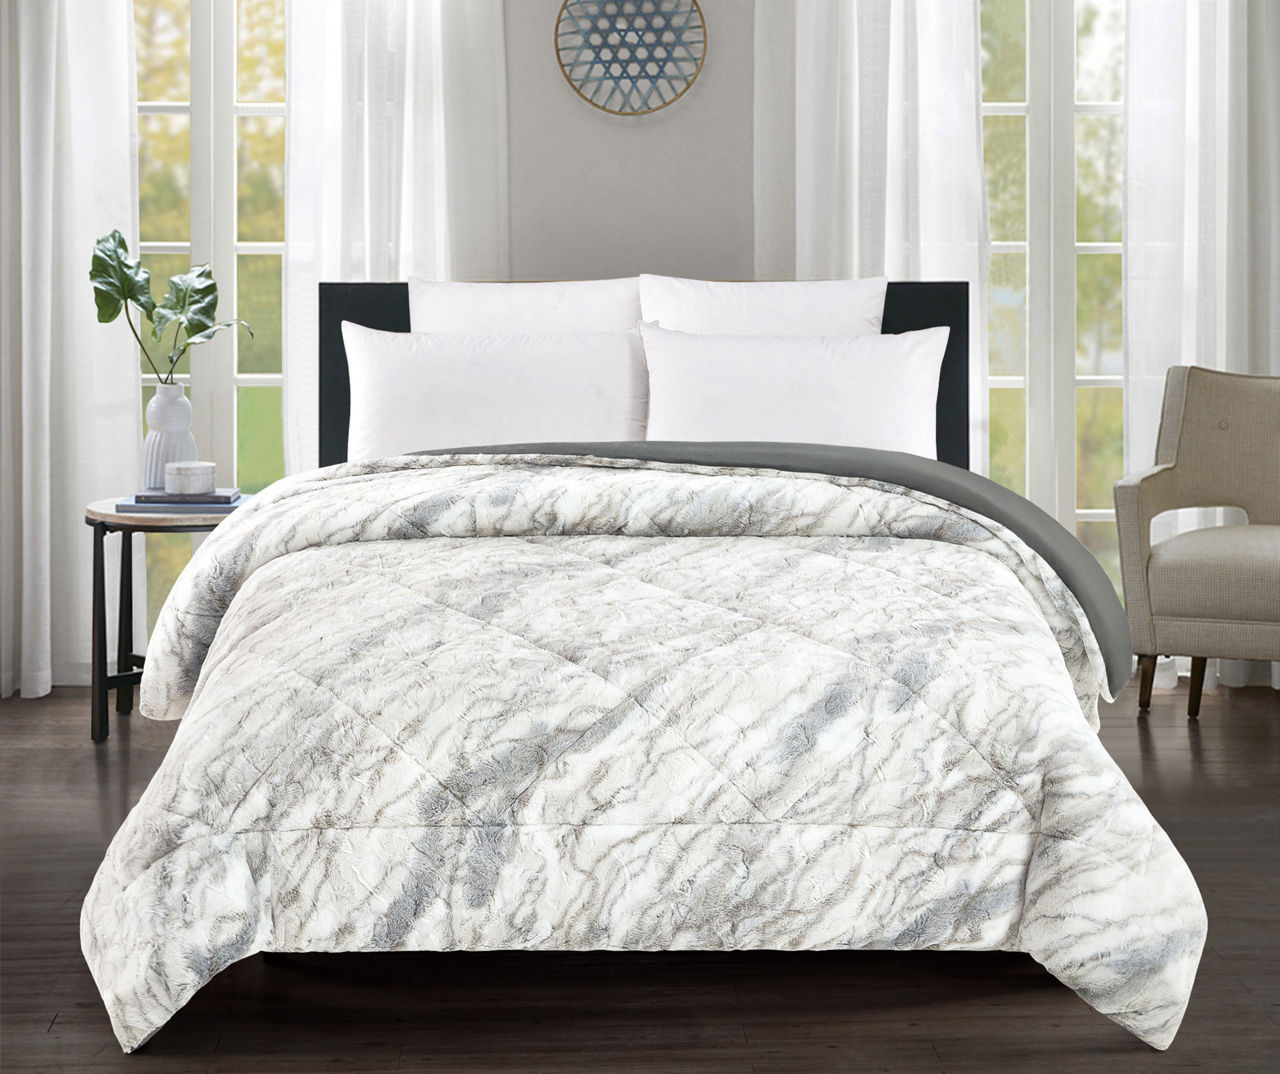 White & Gray Marbled Faux Fur King Comforter